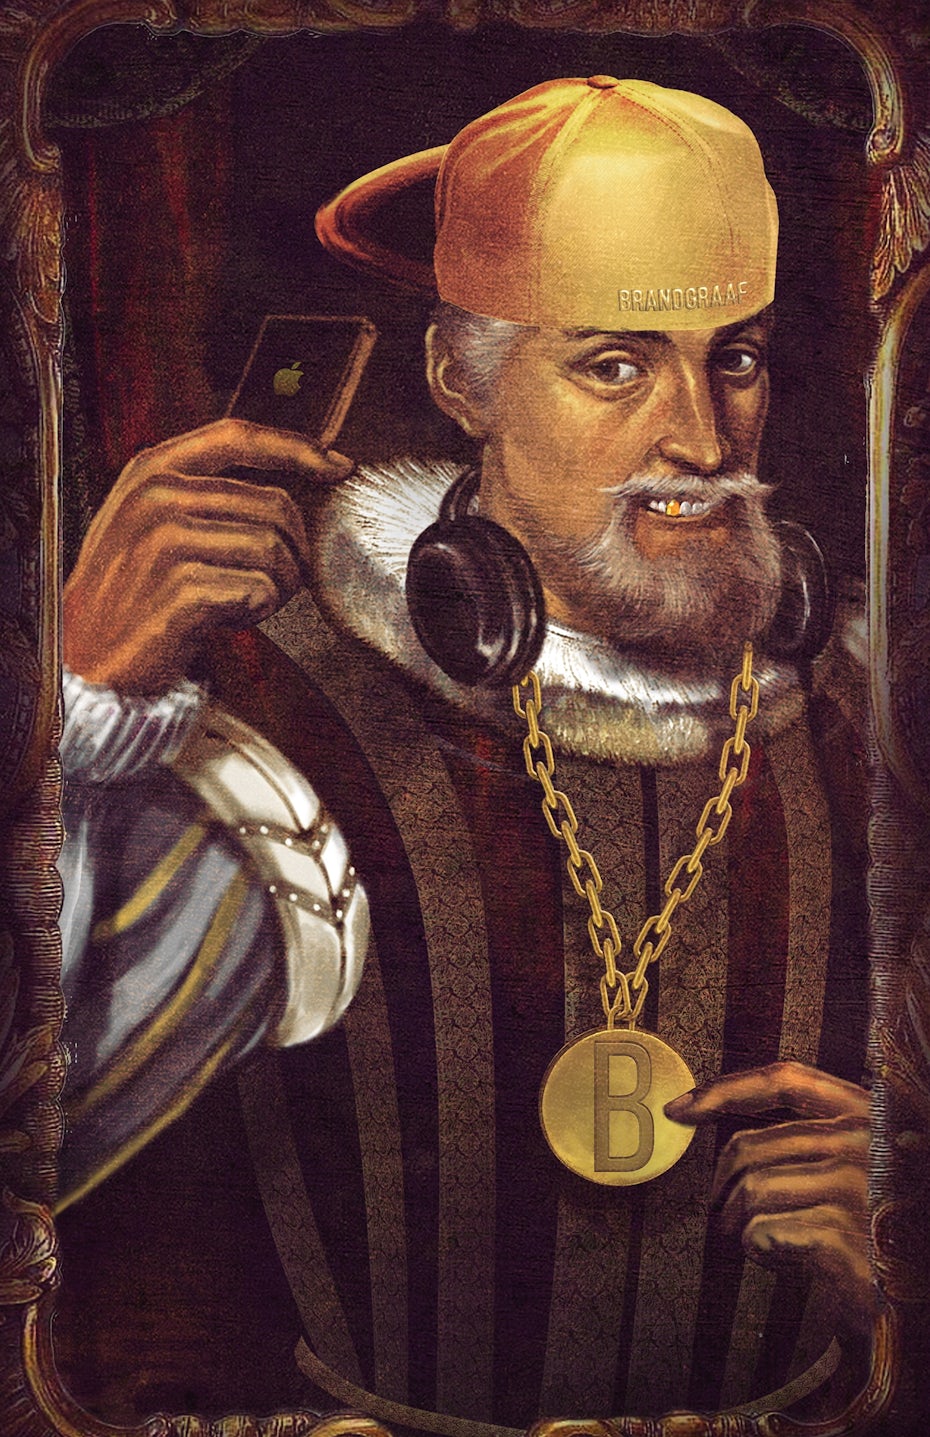 A portrait illustration of a royal character with a gold chain